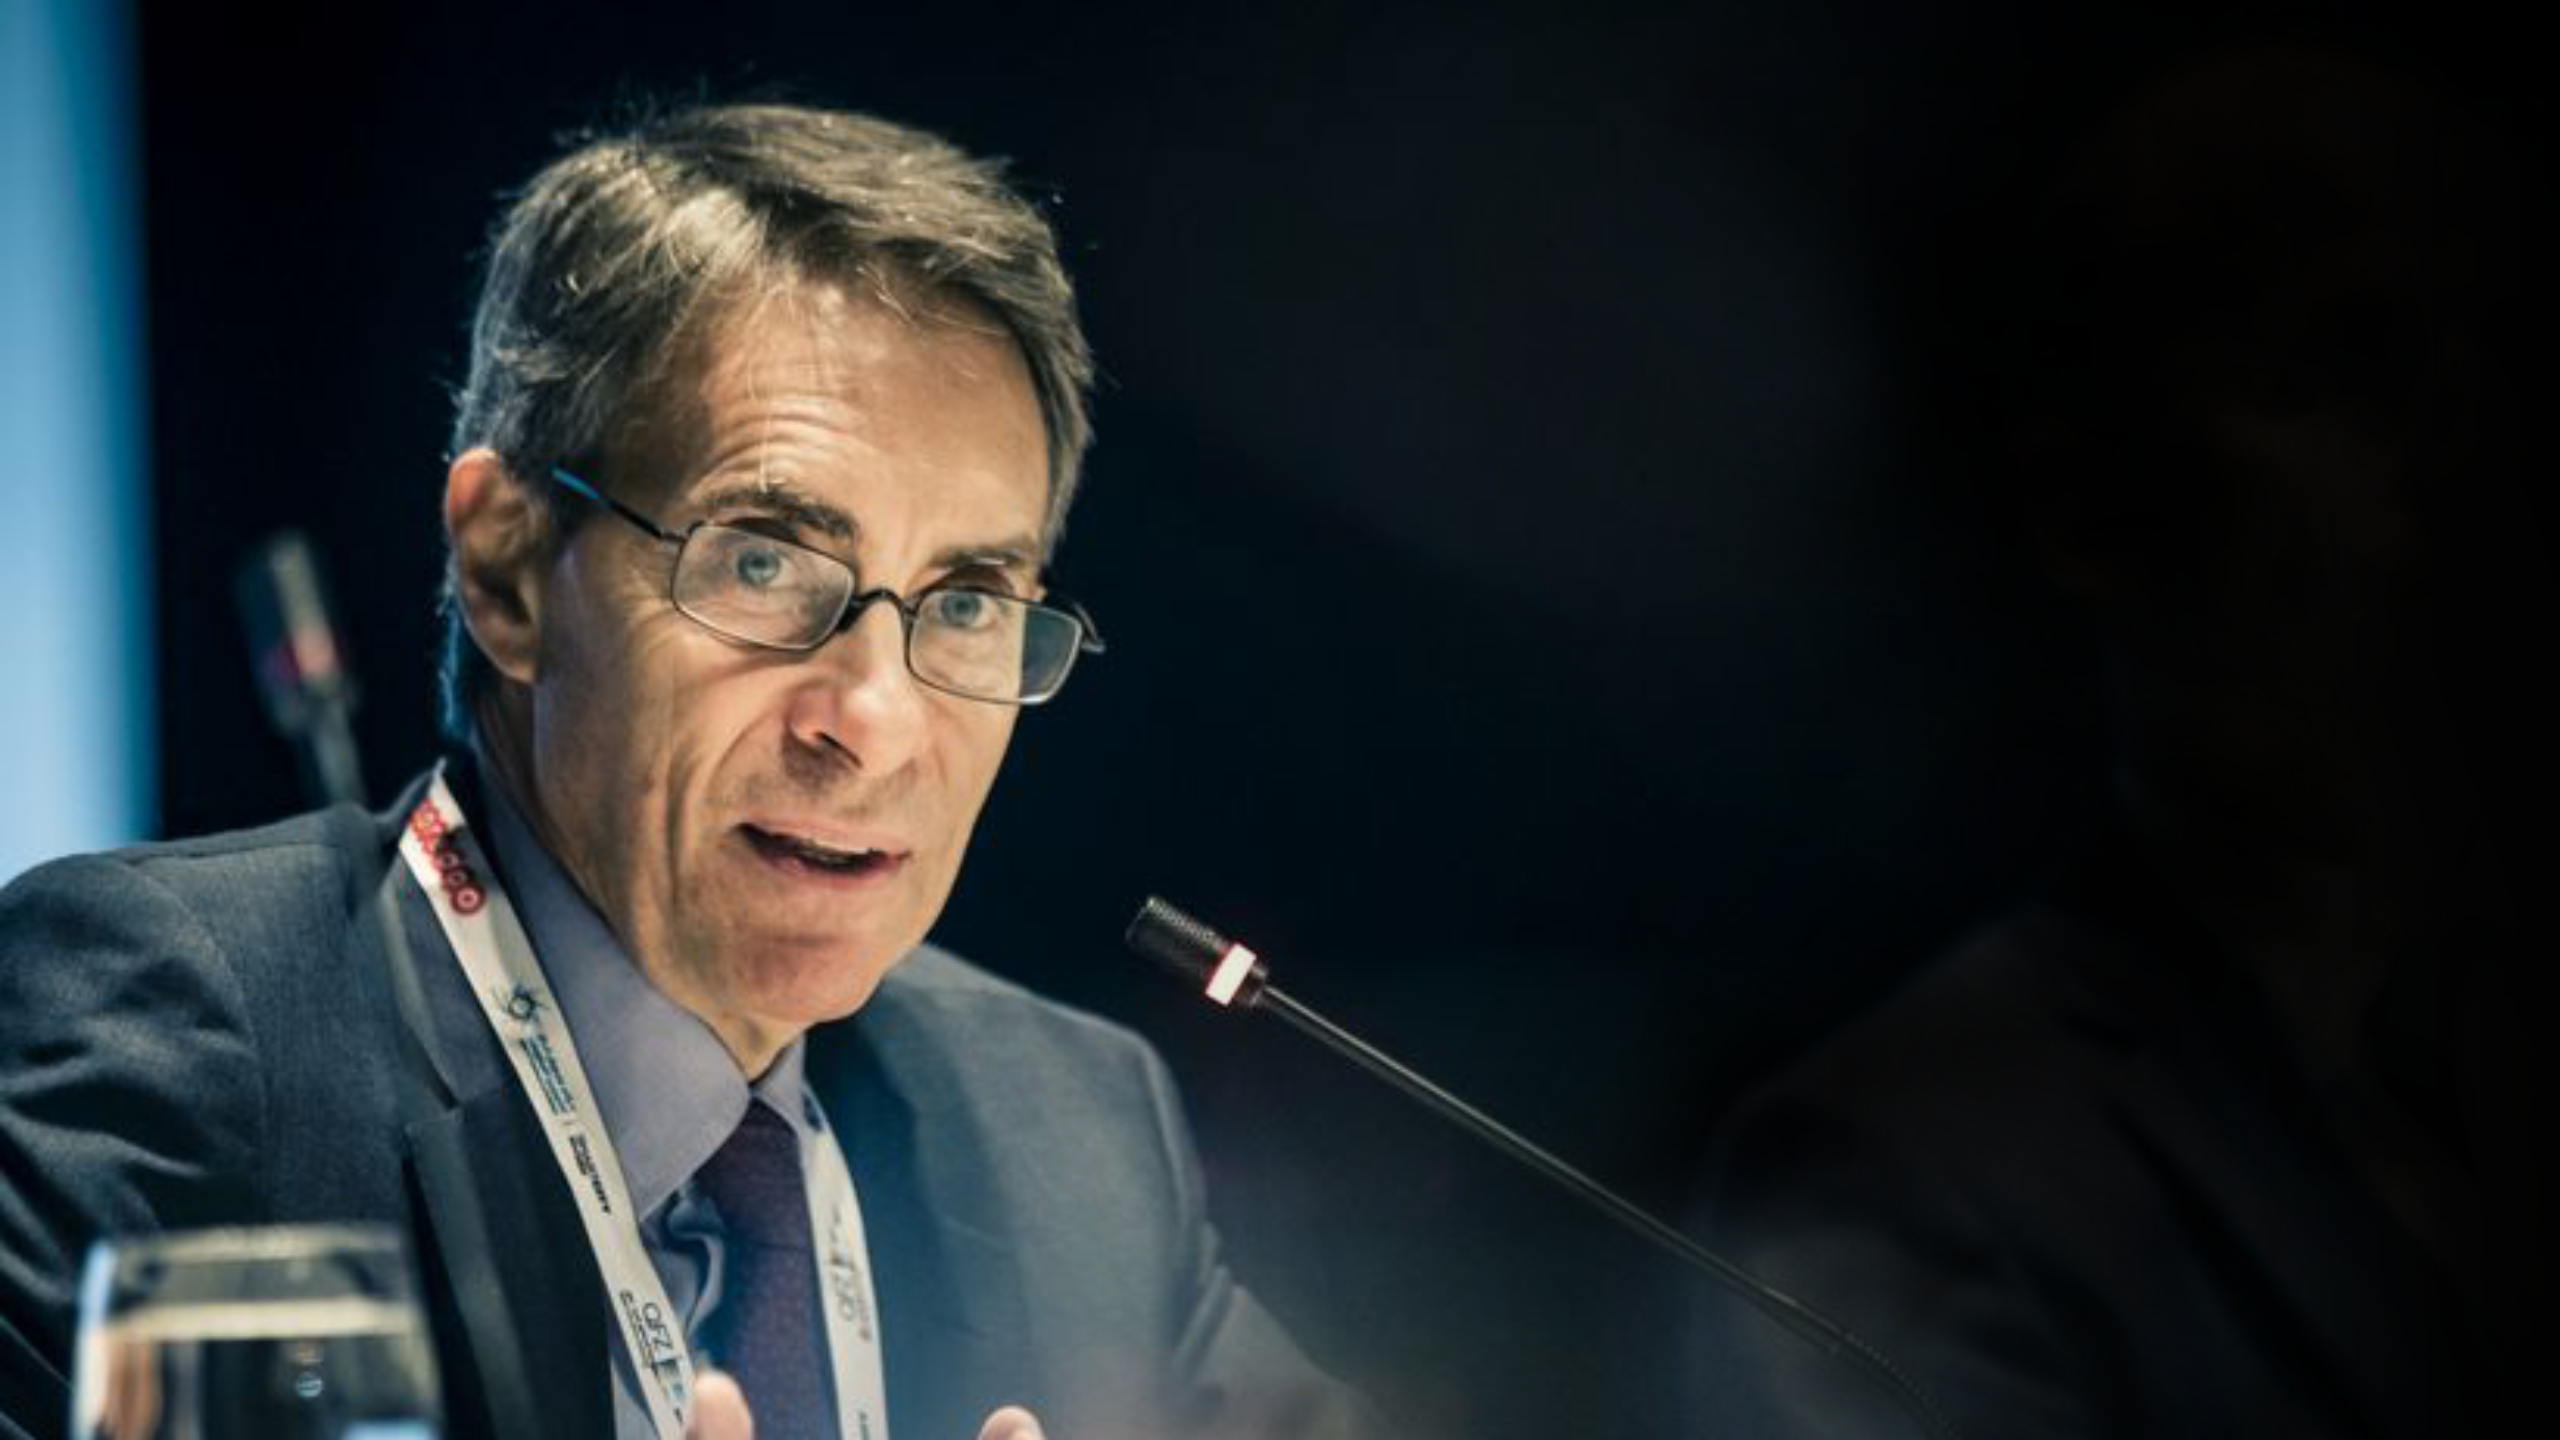 Kenneth Roth speaking on panel at 2019 Munich Security Conference. Credit: Kuhlmann, MSC